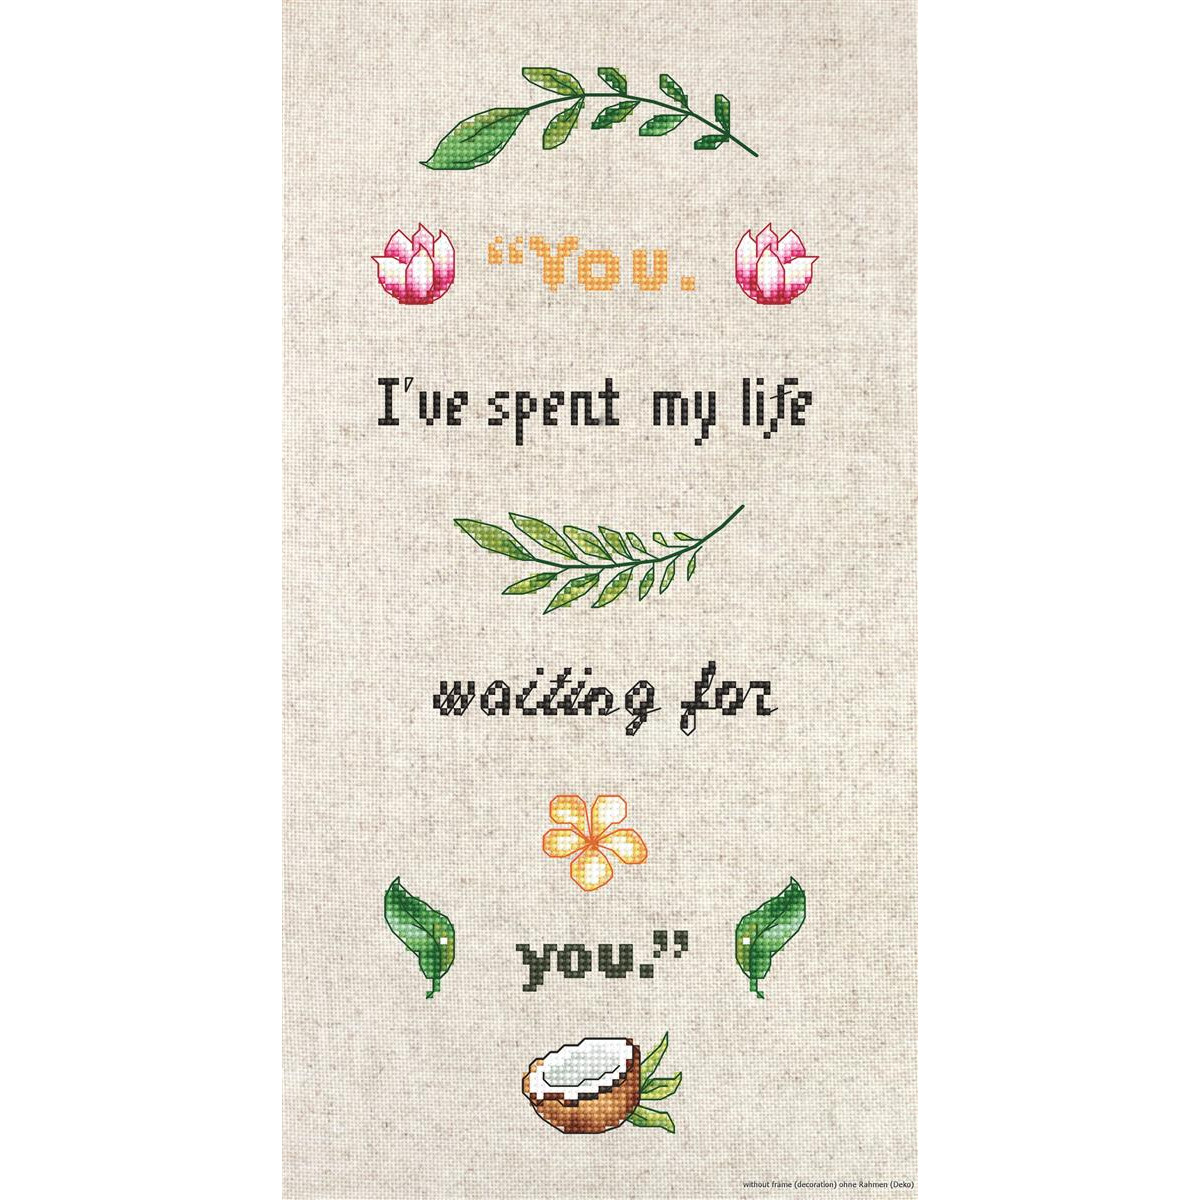 An embroidery design on textured fabric reads: You. Ive...